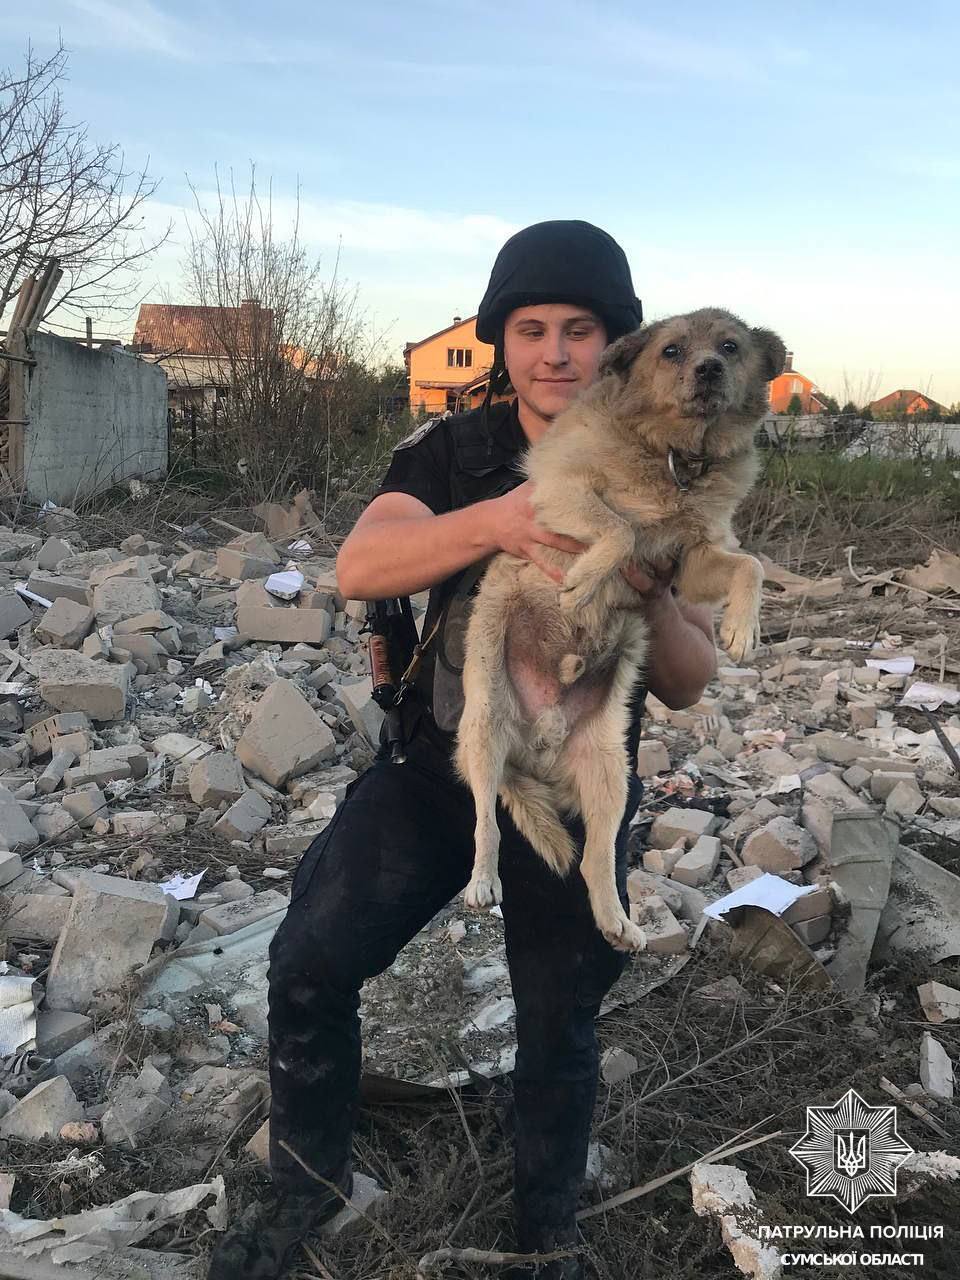 ''Every life is important'': users were touched by the footage with a dog that was rescued from under the rubble after the Russian strike on Sumy. Video